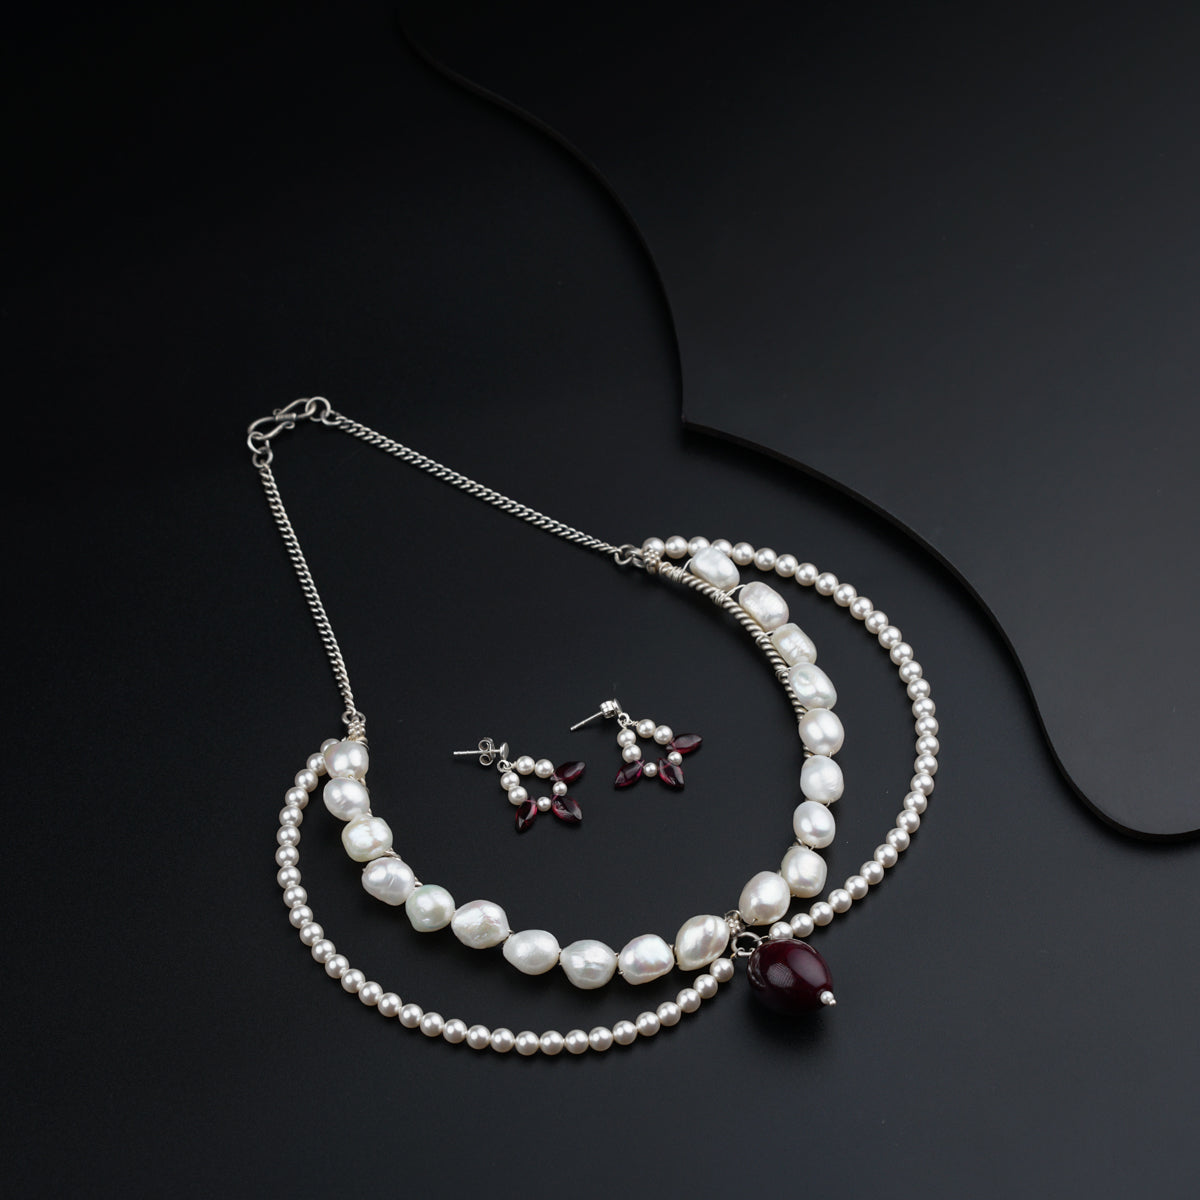 Collar Necklace and Earrings set with High Quality Pearls and Garnet Pendant